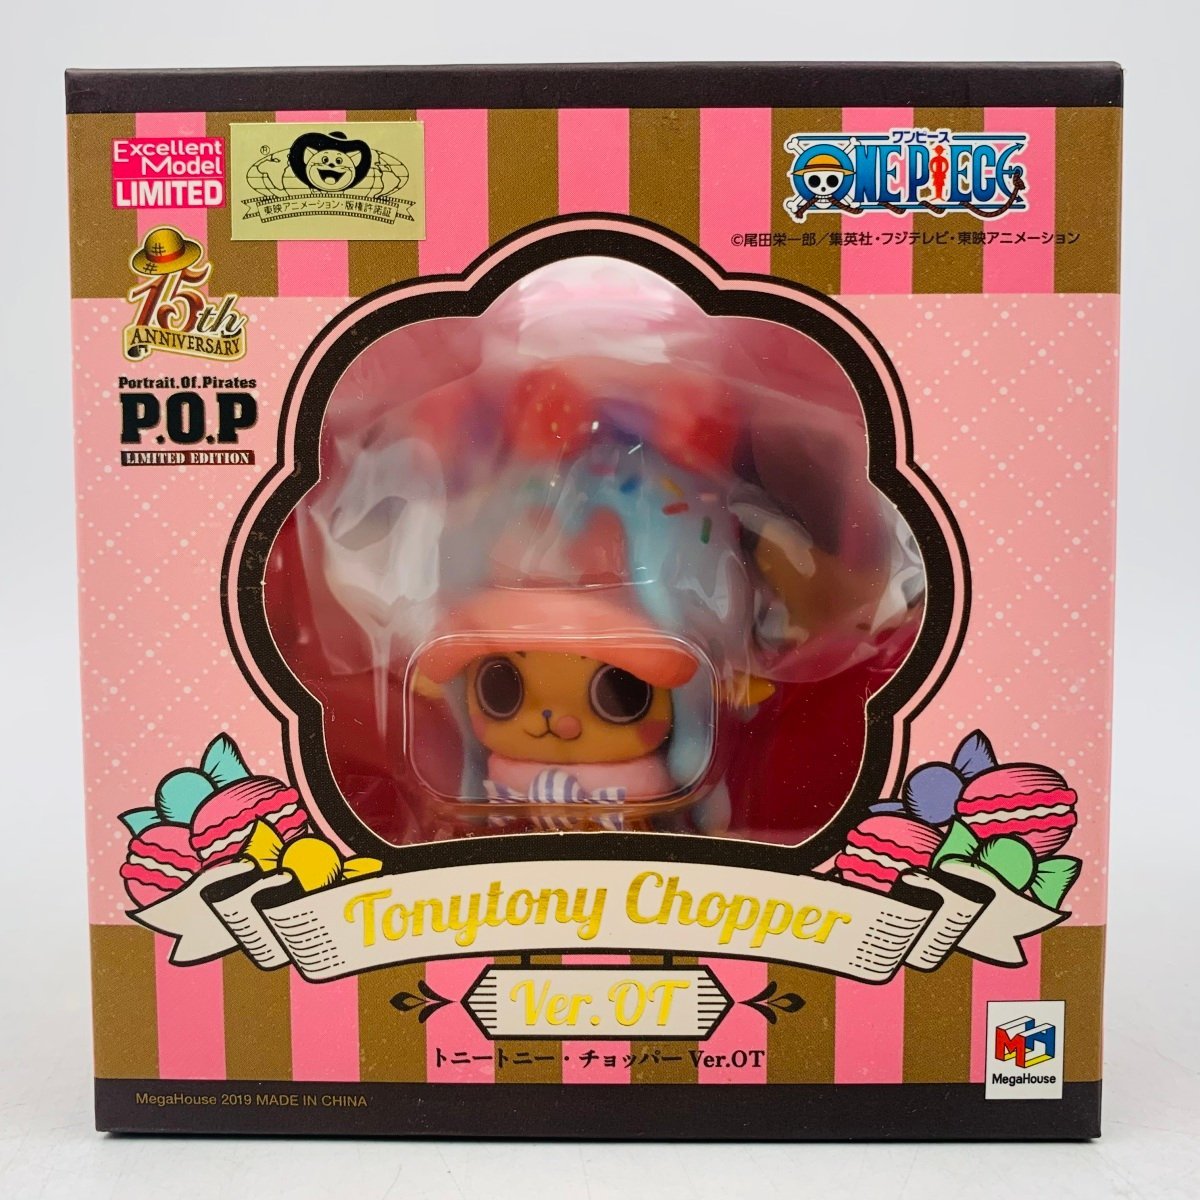 ☆P.O.P LIMITED EDITION トニートニー・チョッパー Ver.P.O.P!◇新品Ss-